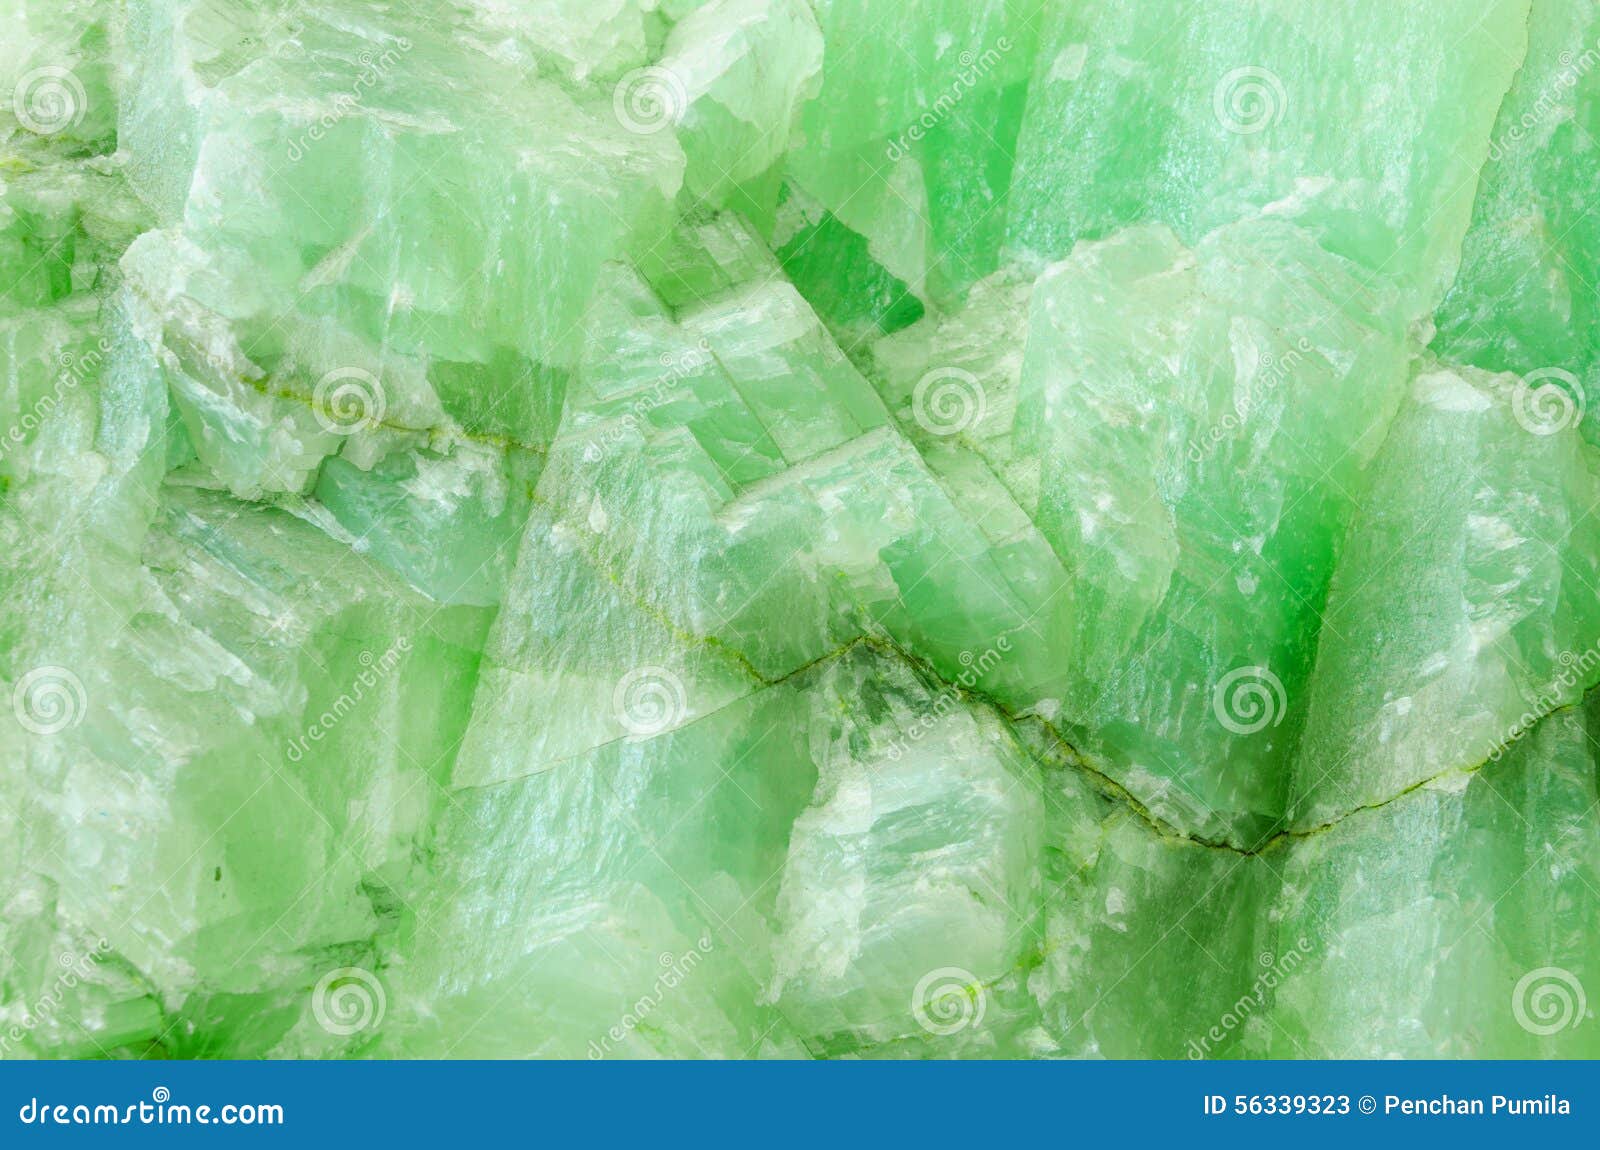 Jade Texture Background Images HD Pictures and Wallpaper For Free Download   Pngtree